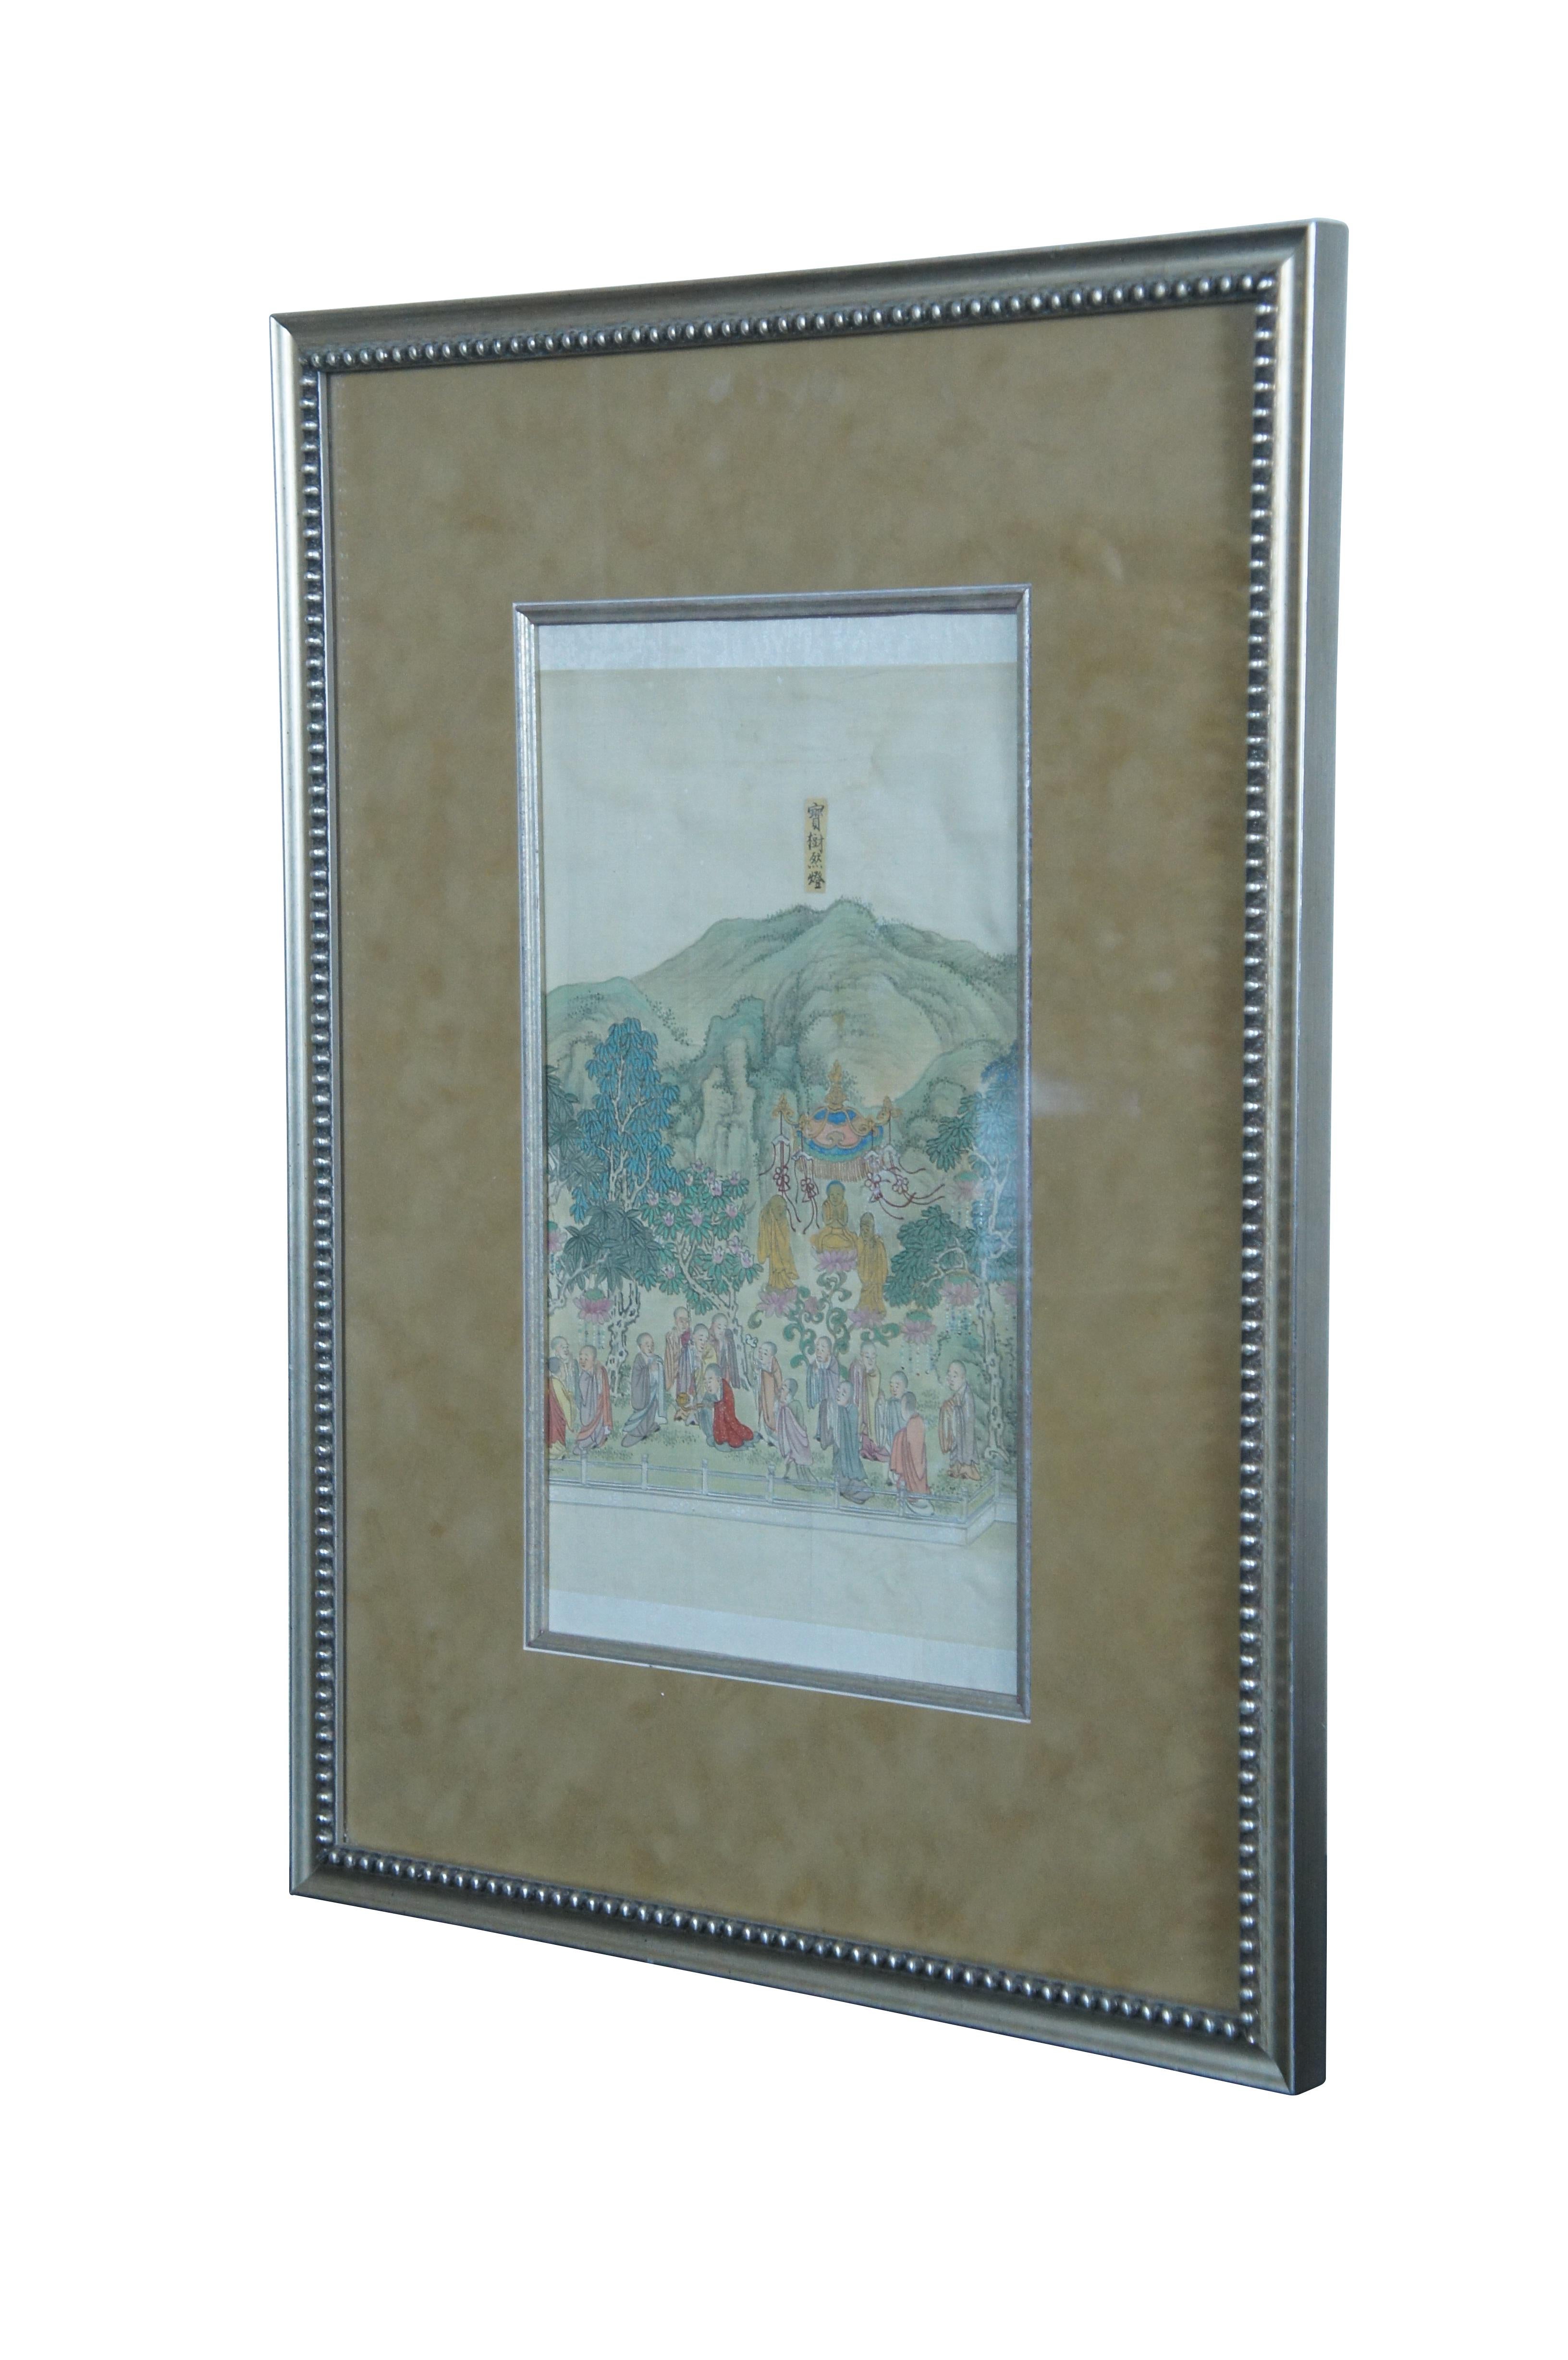 Antique watercolor painting on silk, showing the Buddhas under a floating canopy, seated on lotus flowers, surrounded by other monks smoking a pipe and meditating, all in a fenced off landscape of trees and hills. Paper label affixed to sky. Beveled